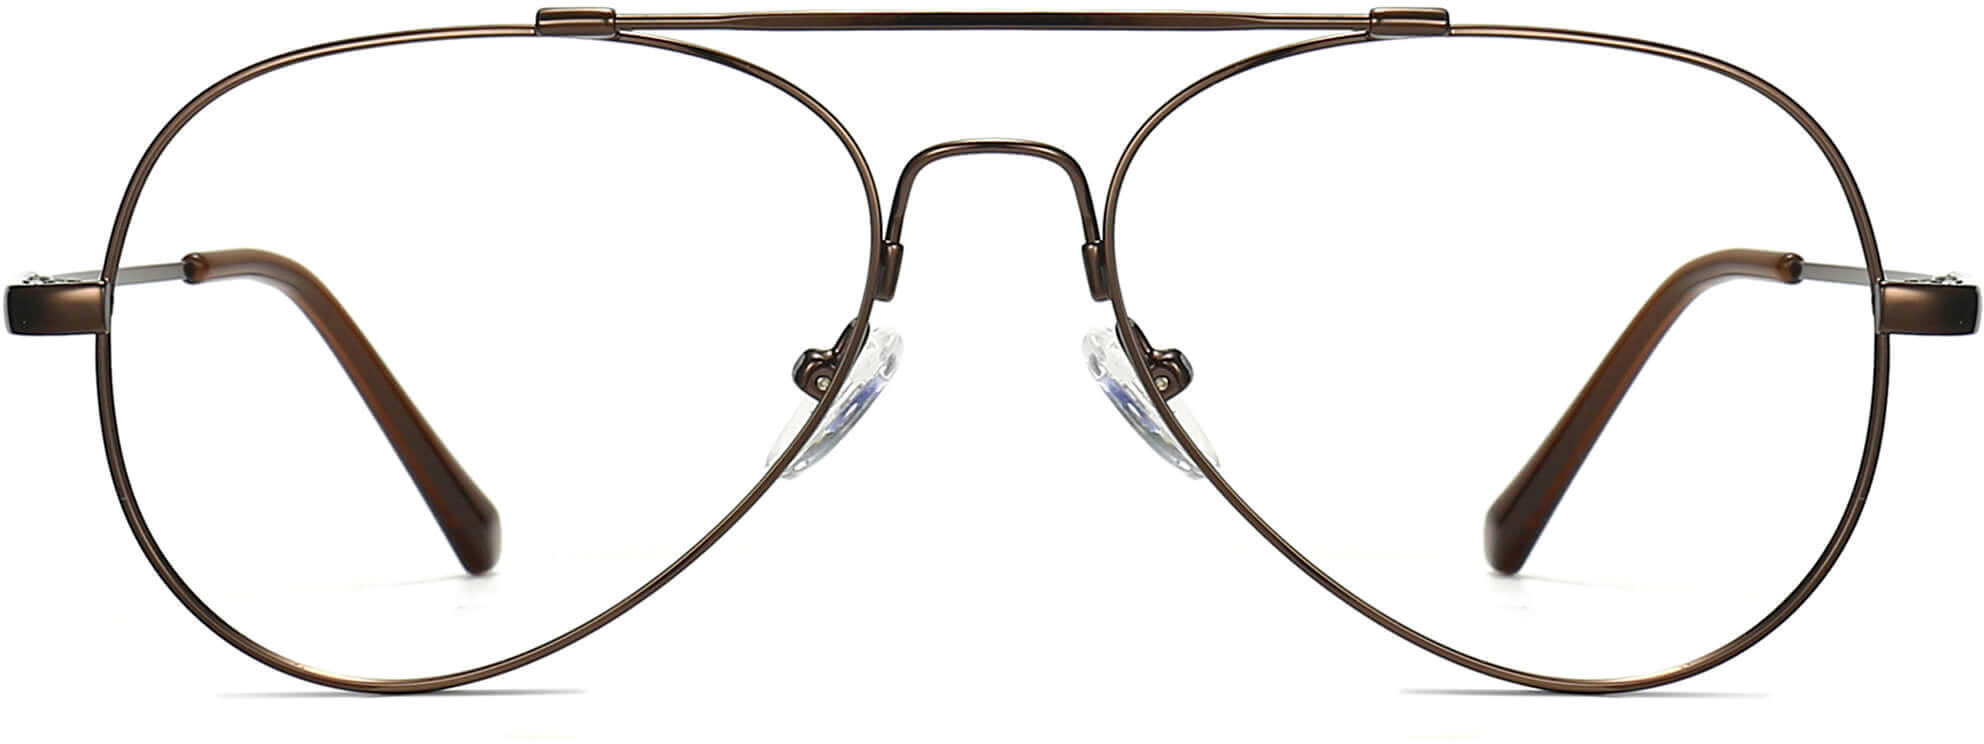 Deacon Aviator Brown Eyeglasses from ANRRI, front view